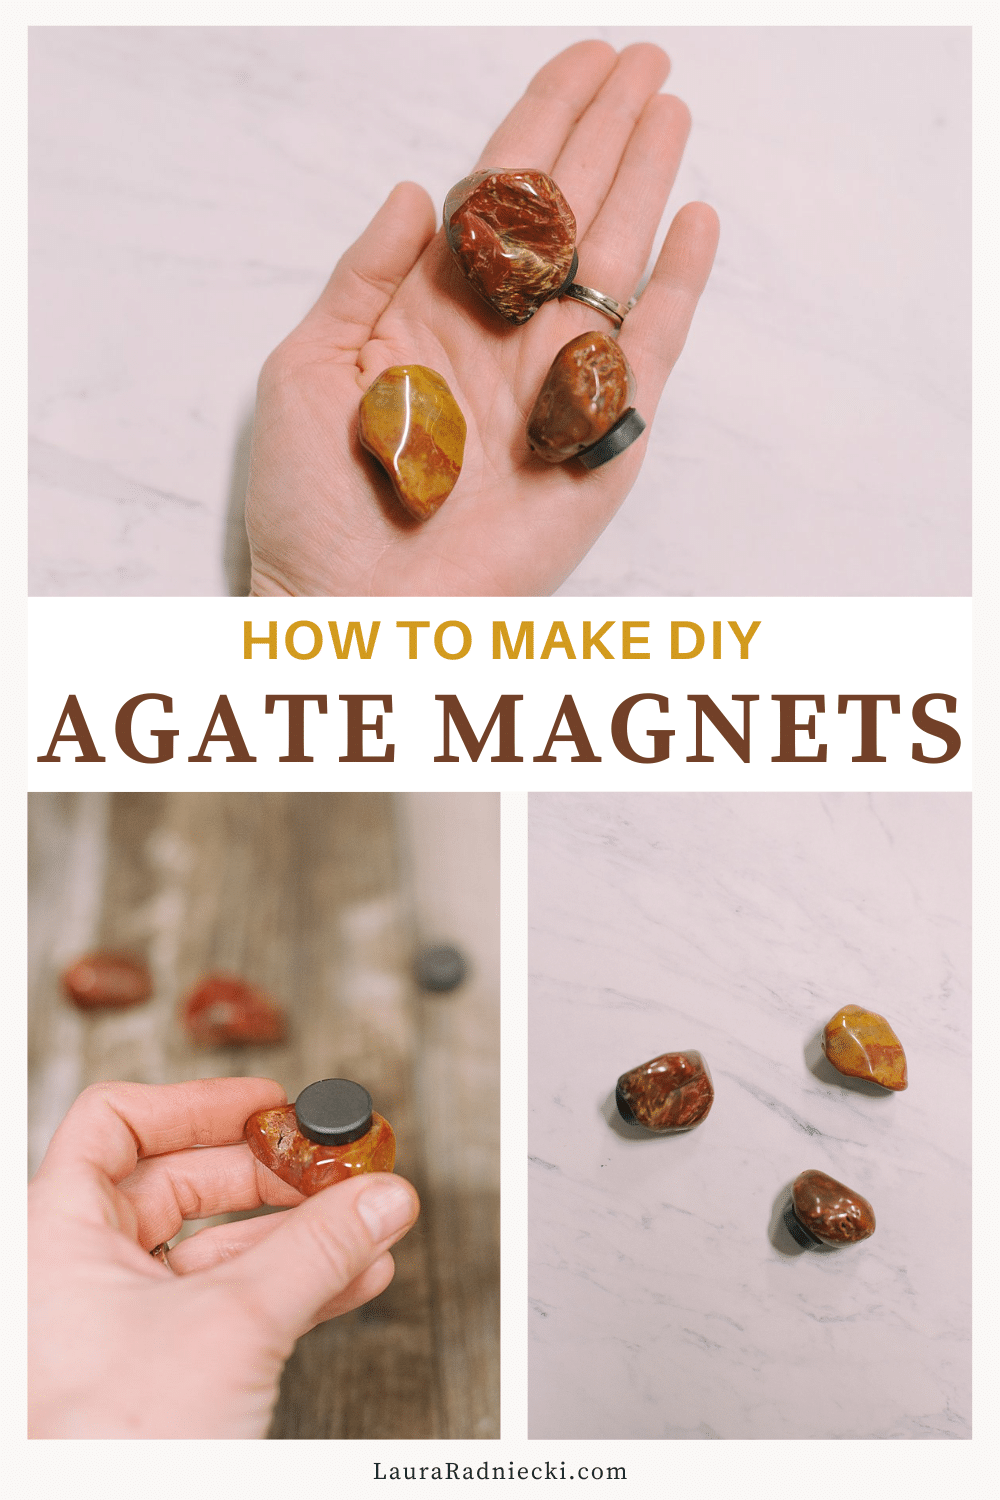 How to Make Agate Magnets